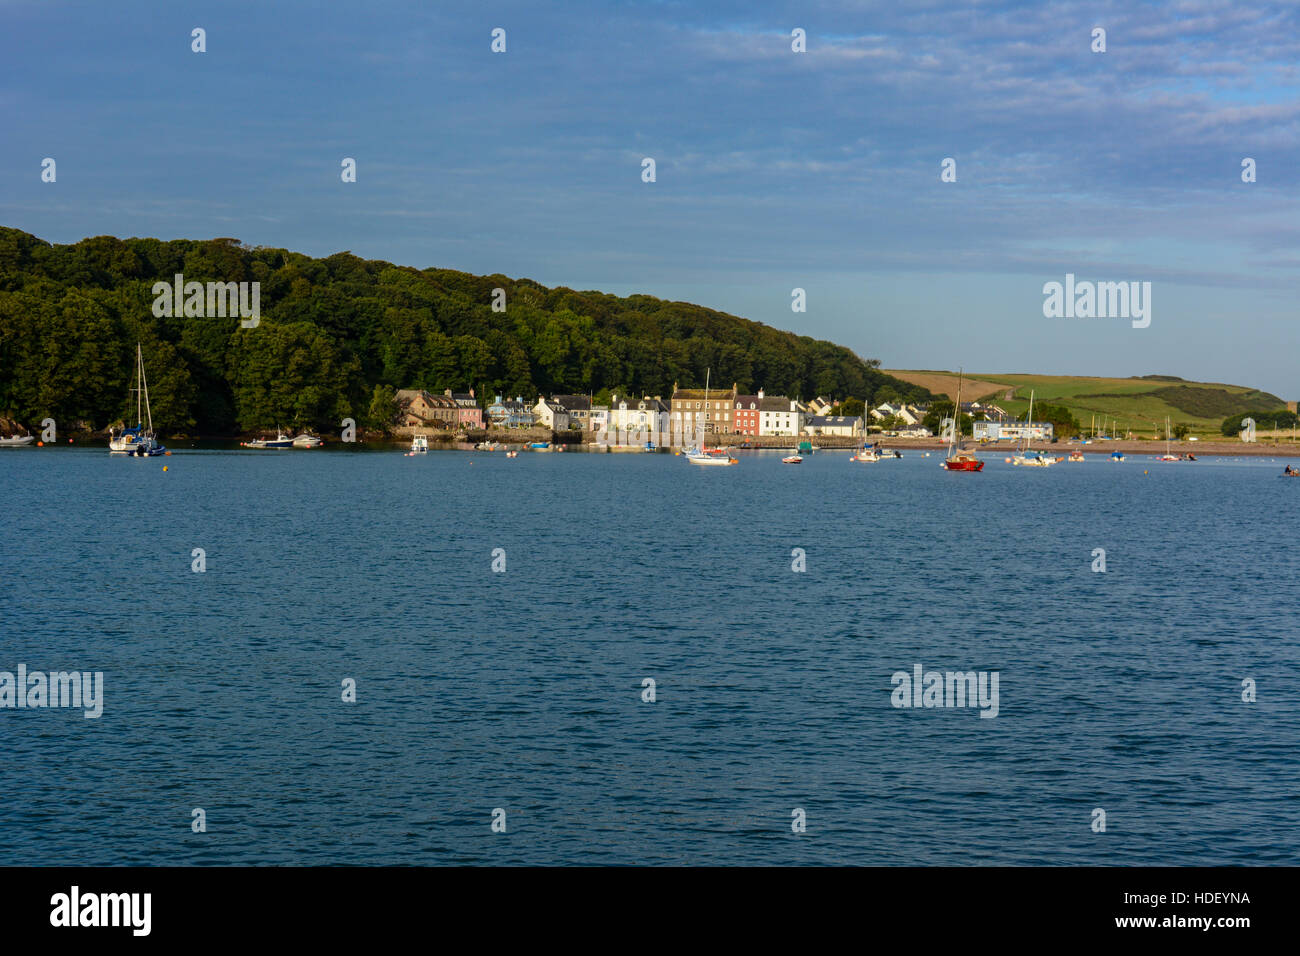 Boats anchored on a blue rippled sea in early morning summer sun at Dale, Pembrokeshire. Stock Photo